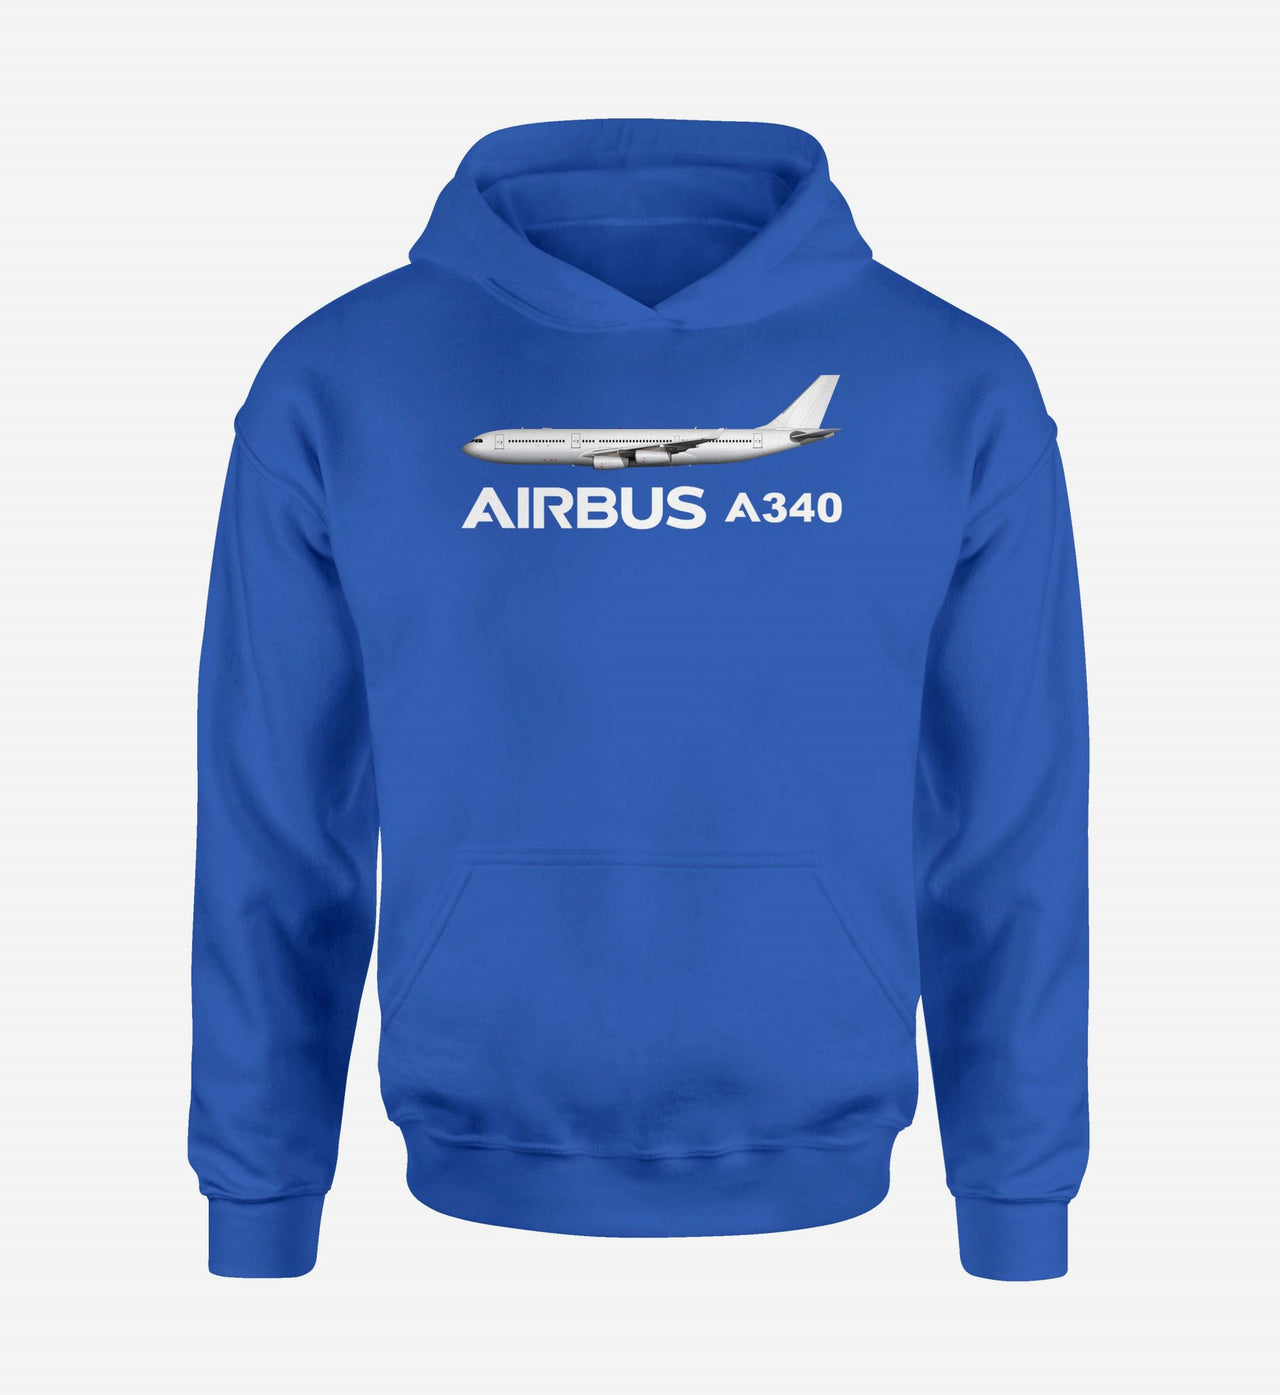 The Airbus A340 Designed Hoodies